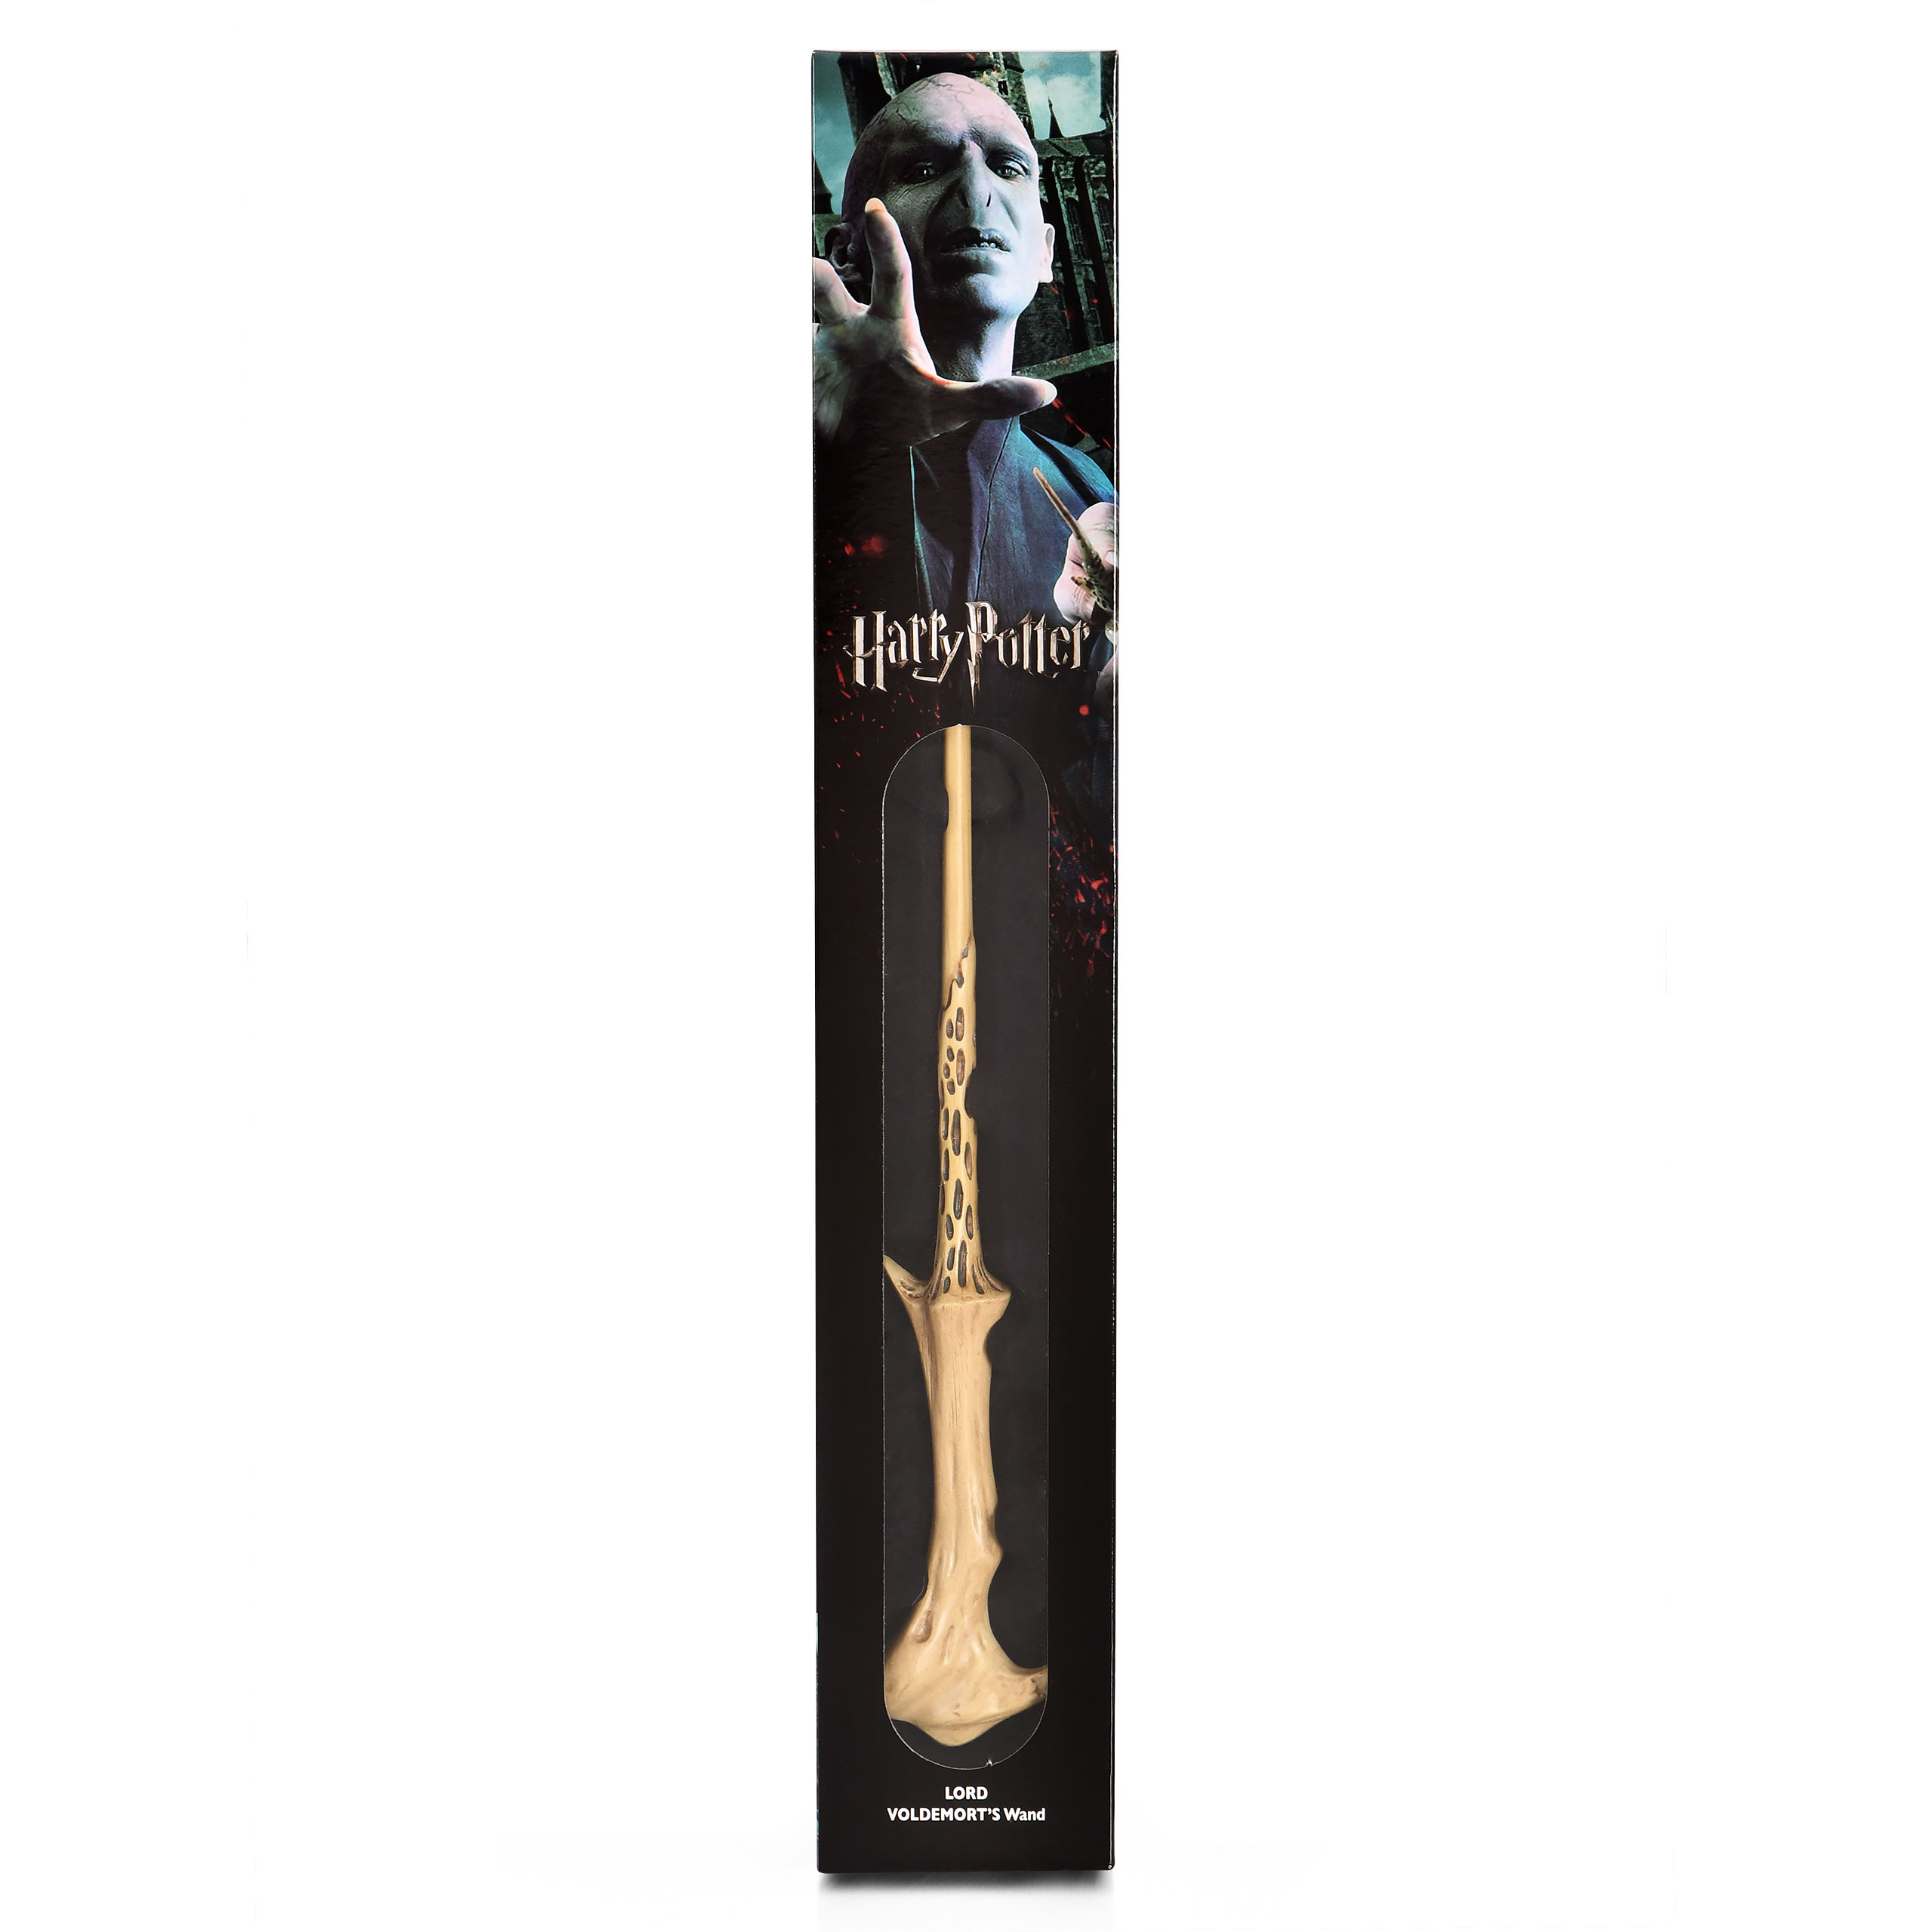 Lord Voldemort Wand in Blister